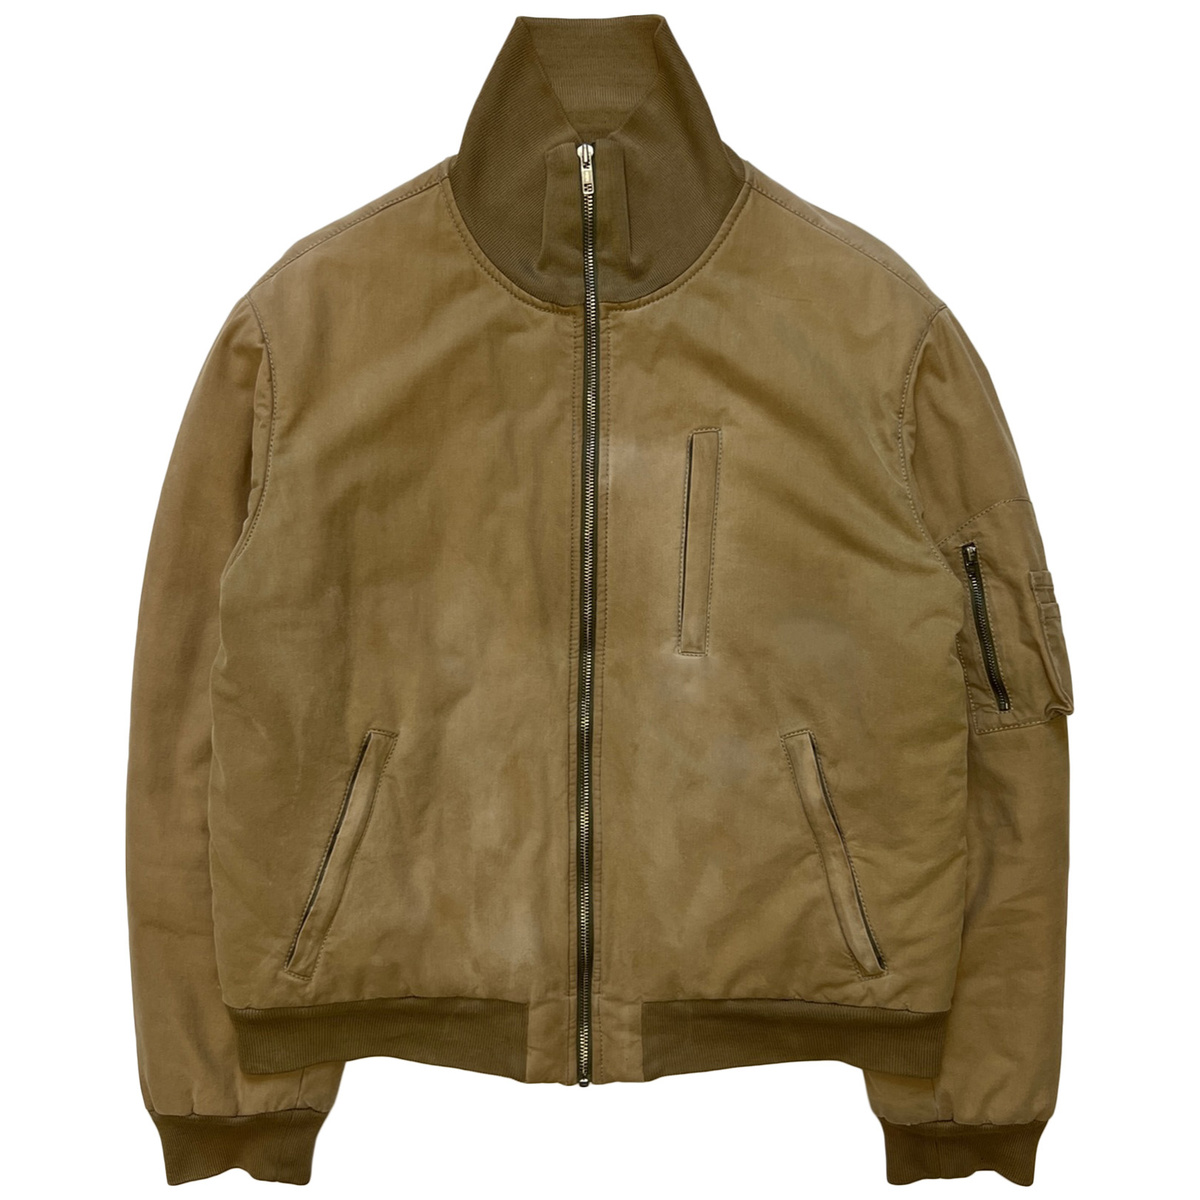 Helmut Lang, A/W 1999 Resin Coated High Neck MA-1 Bomber Jacket 